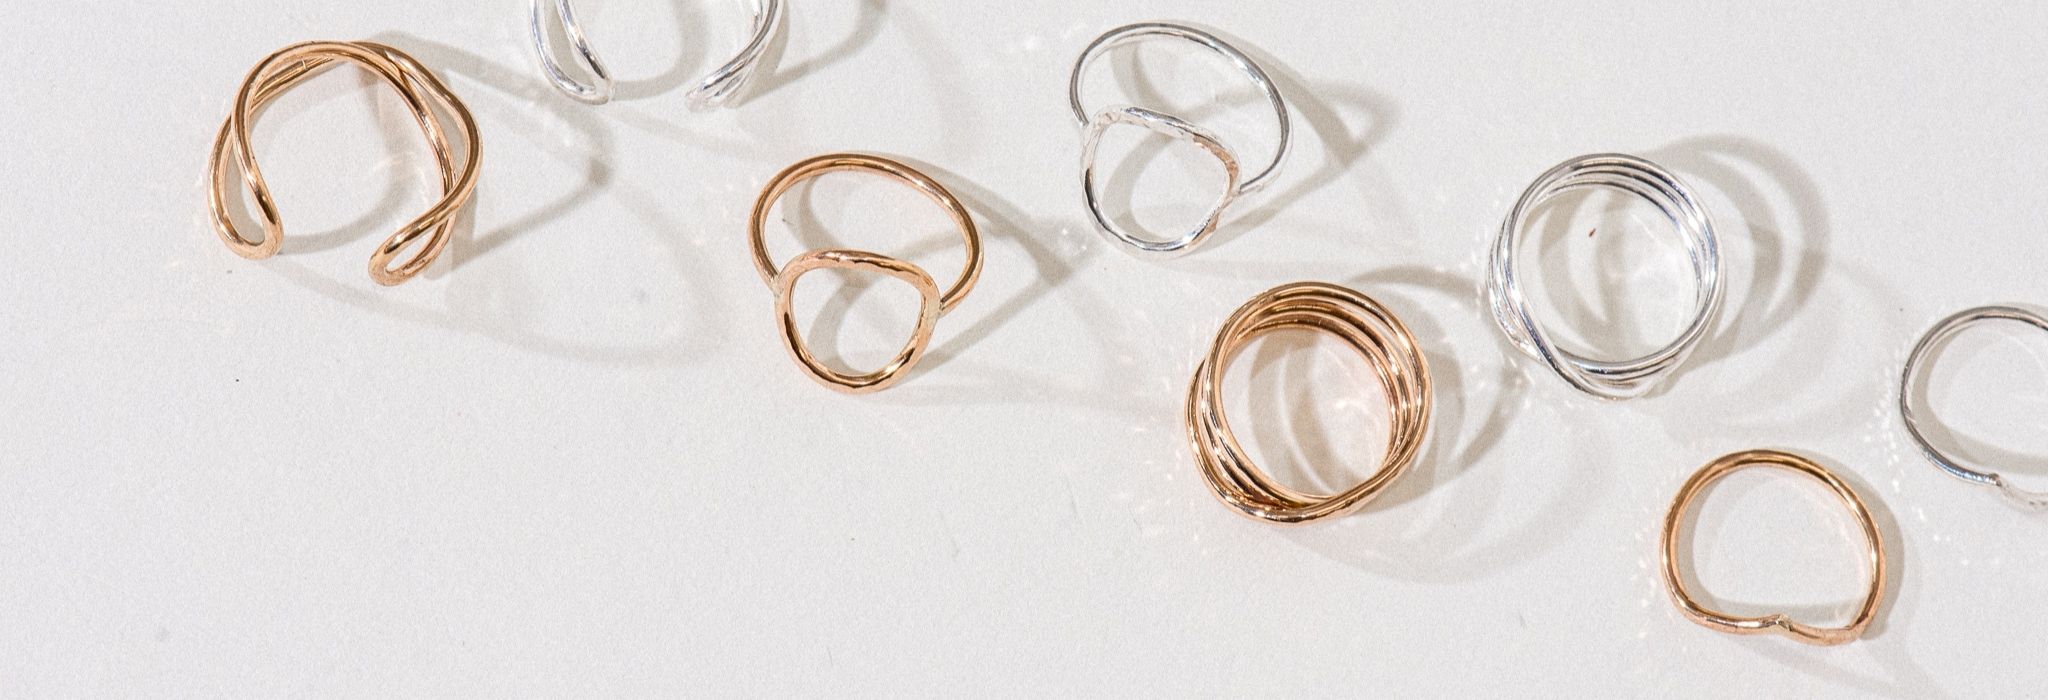 14K Gold Filled or Sterling Silver Rings. Tarnish resistant and waterproof jewelry handmade in Hawaii.